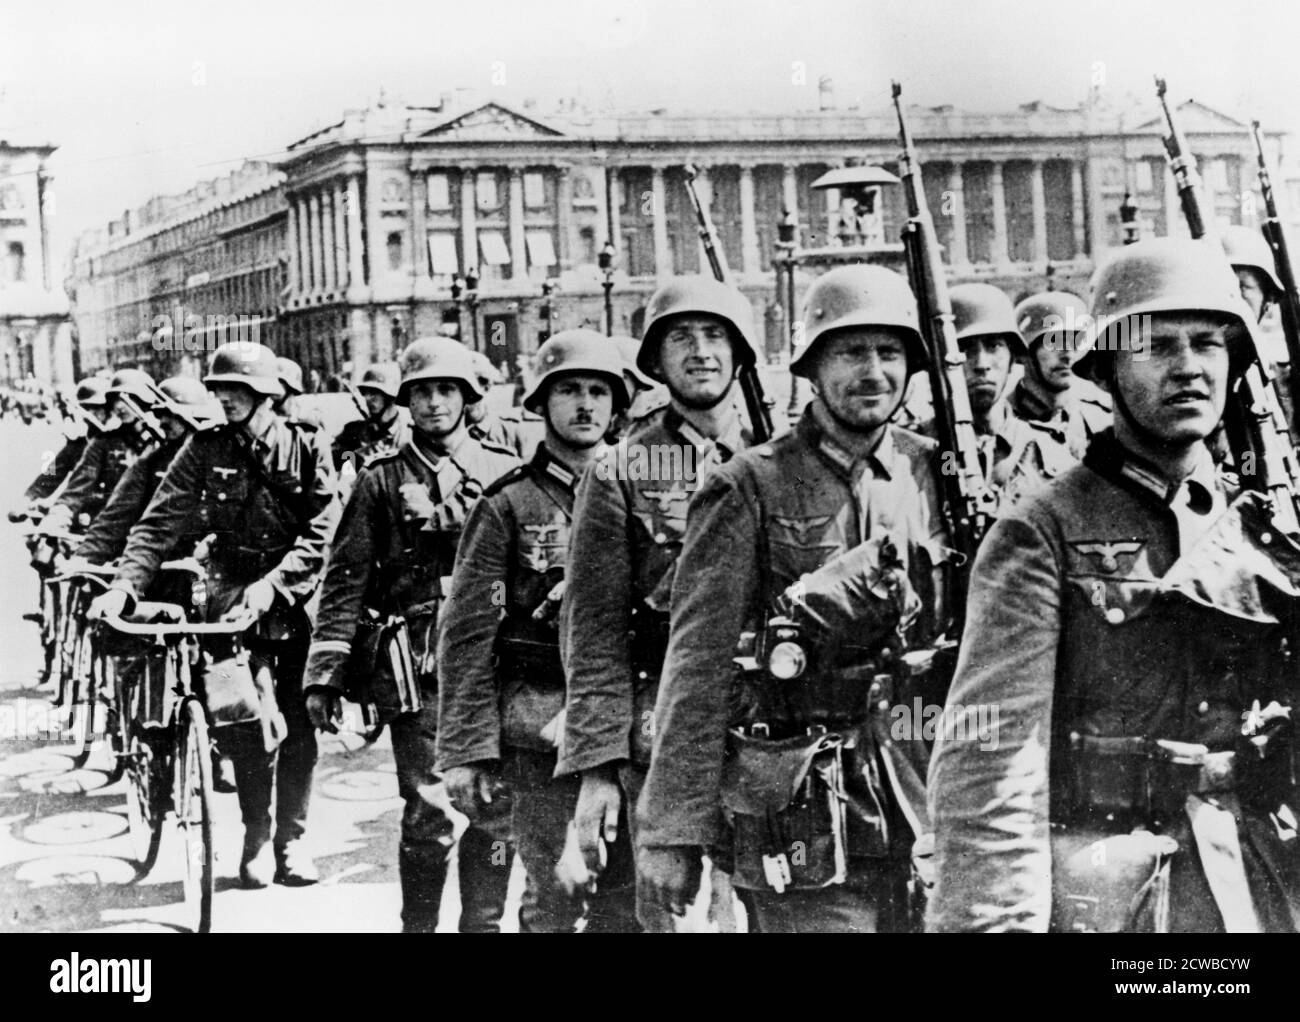 German troops marching through Paris, 17 June 1940. On 10 June the French government abandoned Paris, declaring it an open city, and the first German troops arrived four days later. The photographer is unknown. Stock Photo